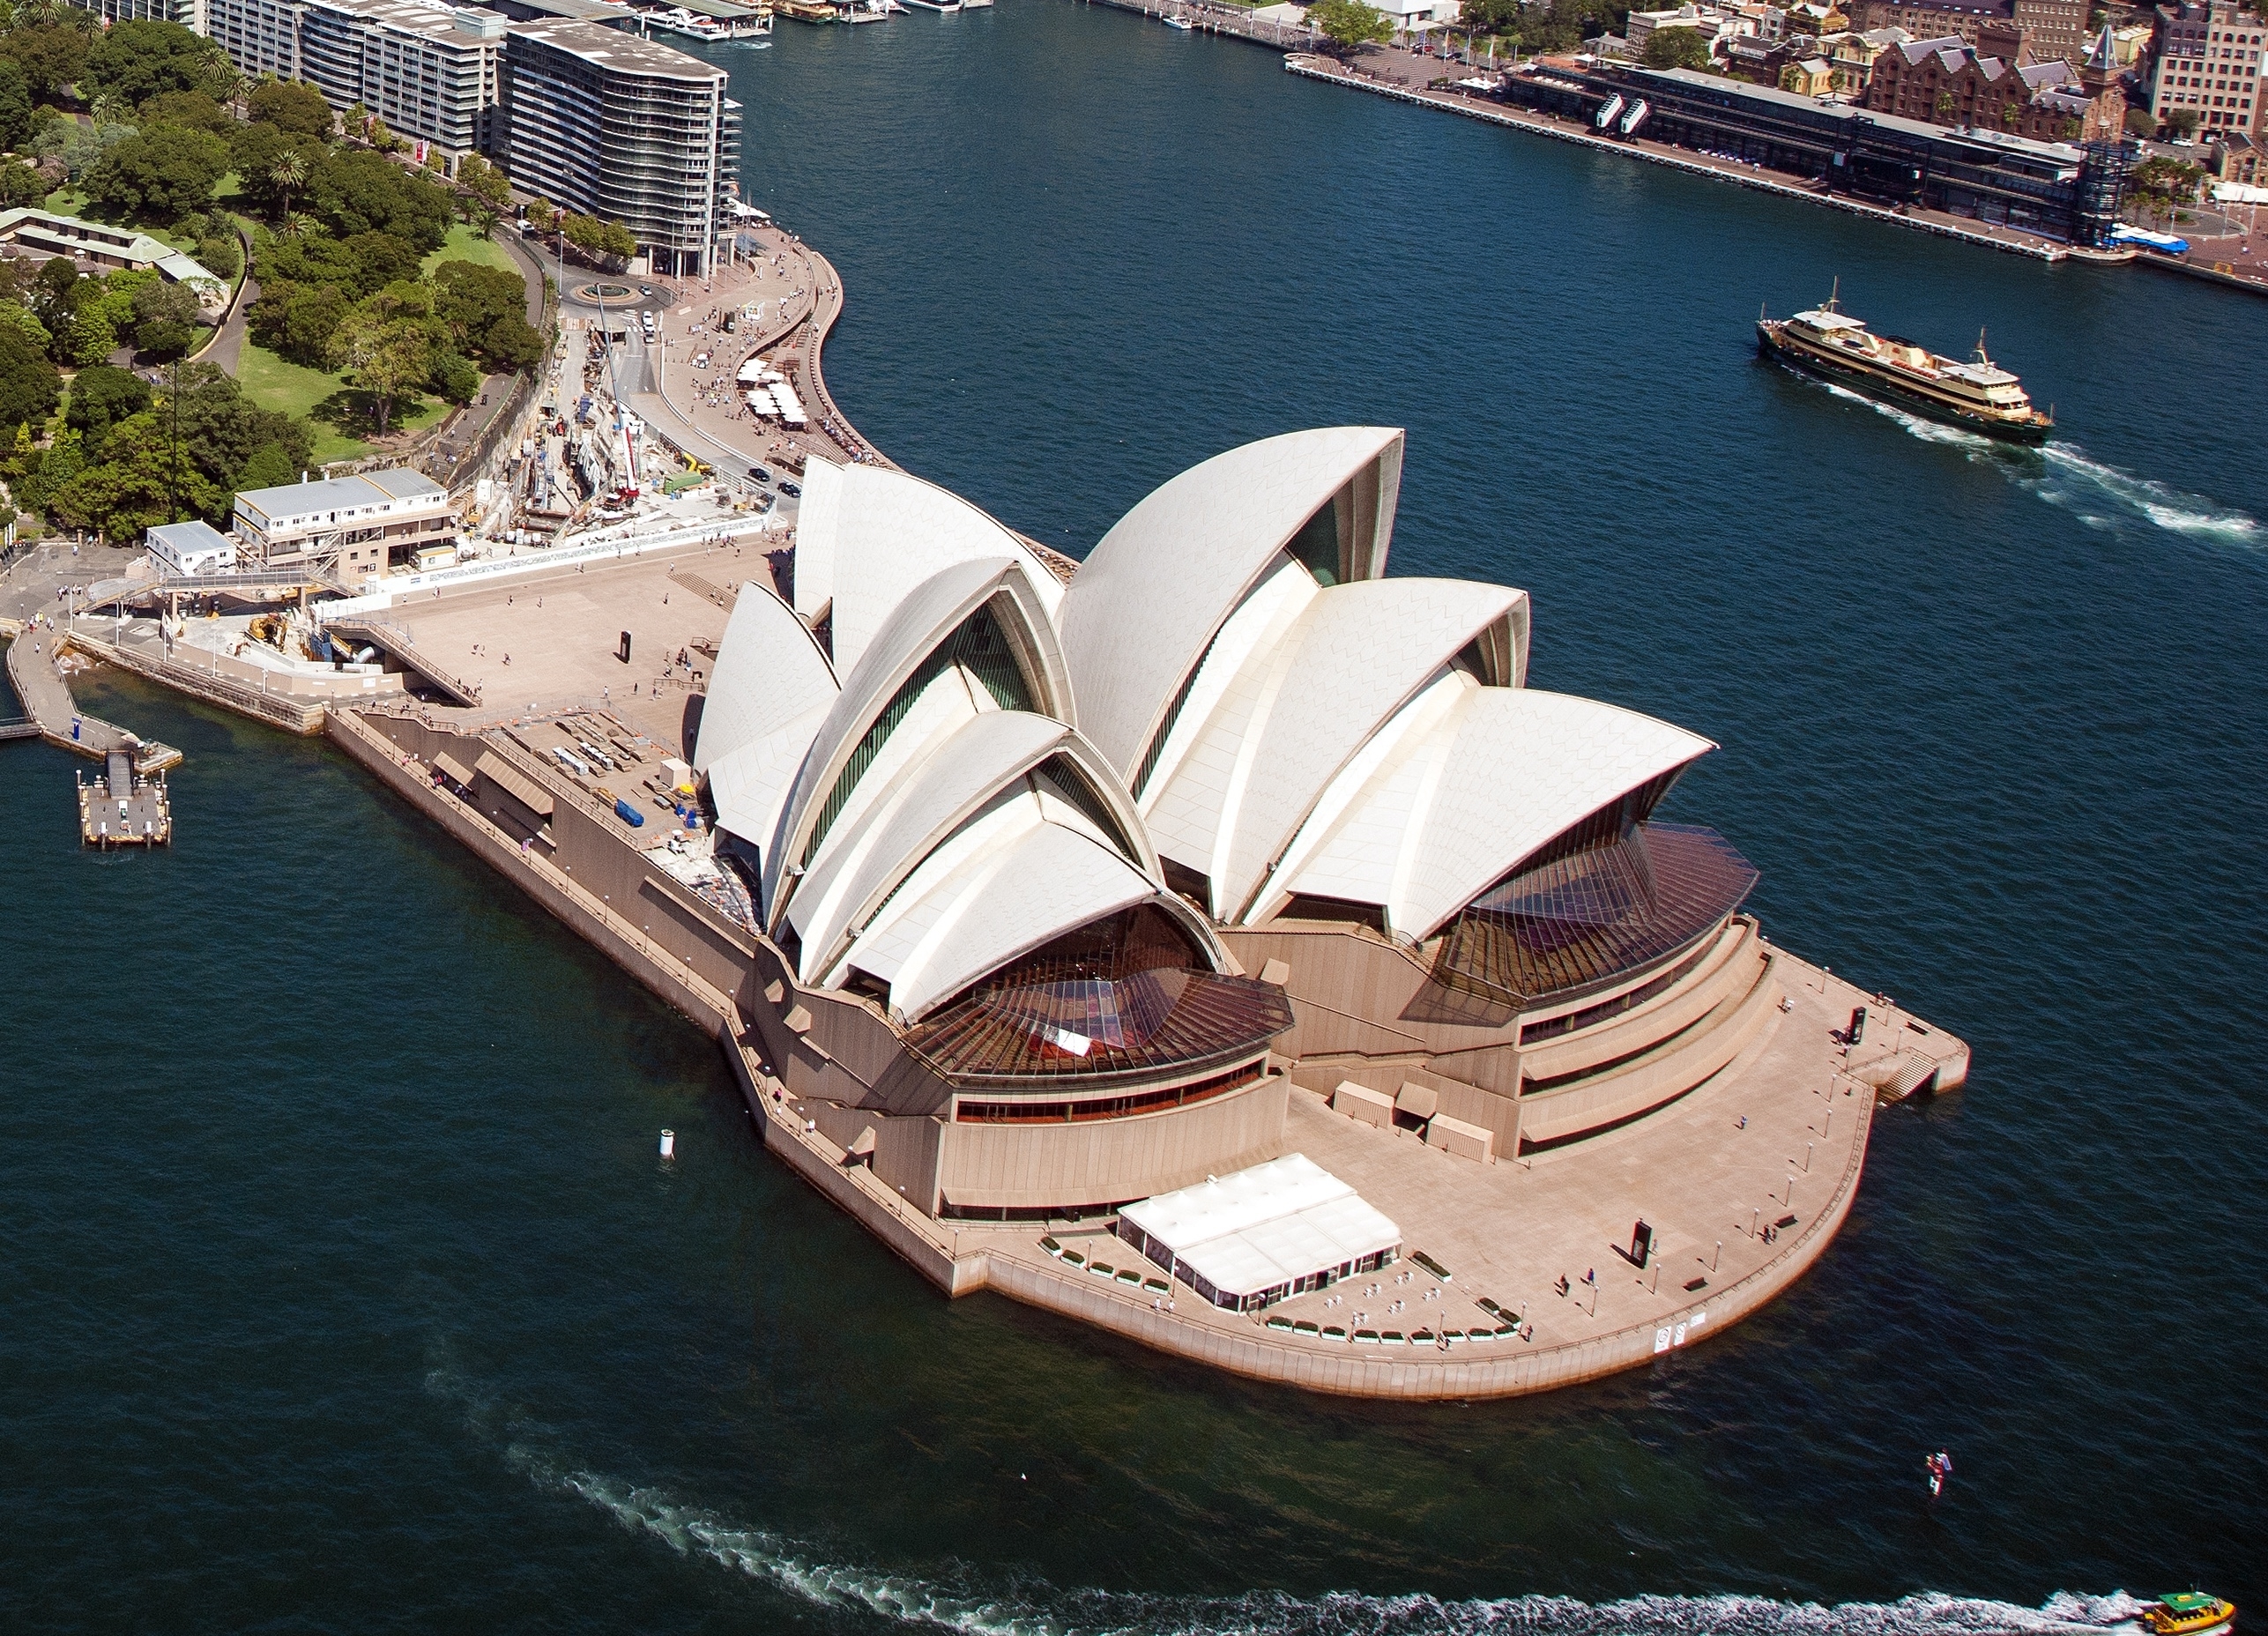 Aerial view of the Sydney Opera House beside the harbor, with nearby buildings and a boat on the water